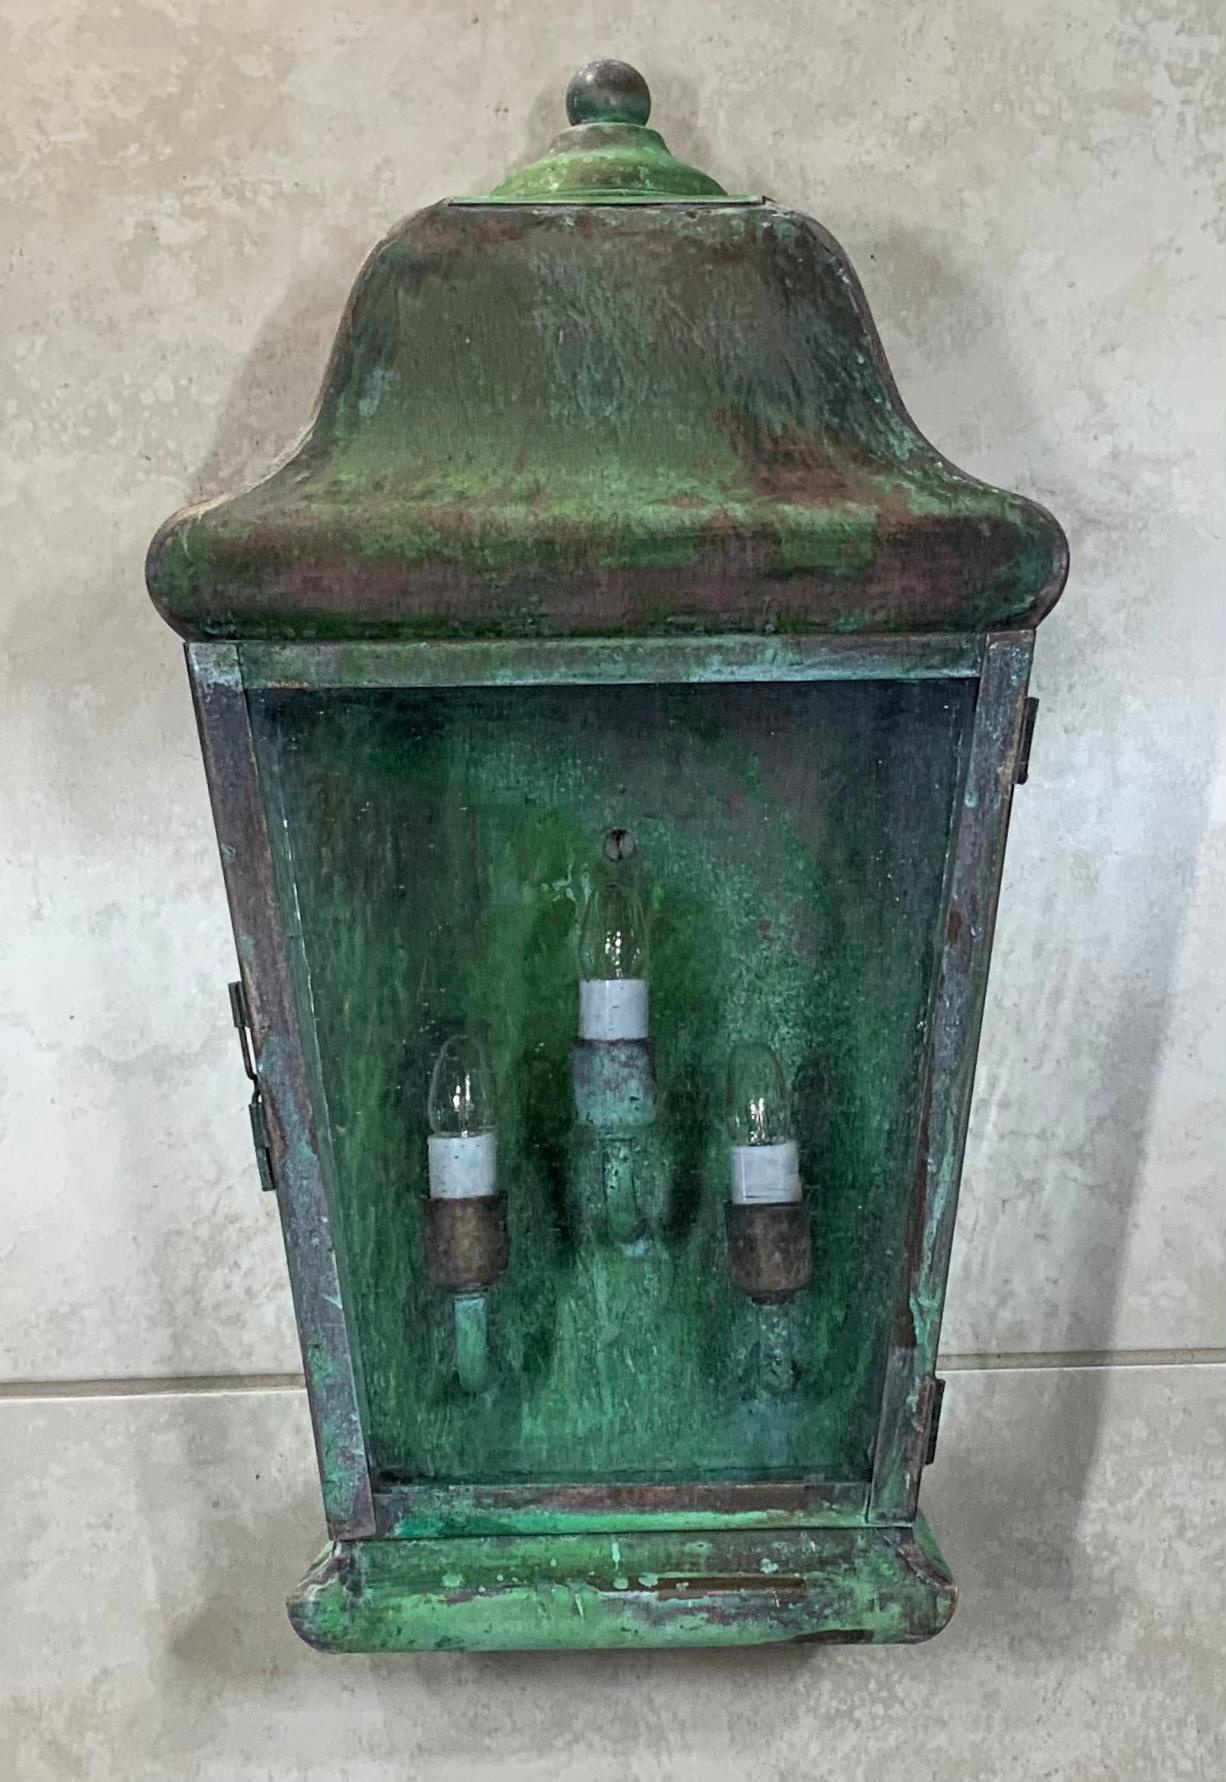 Quality wall lantern made of solid copper, with three/40watt lights, seeded glass, UL approved, suitable for wet location ready for use. Beautiful green oxidization.